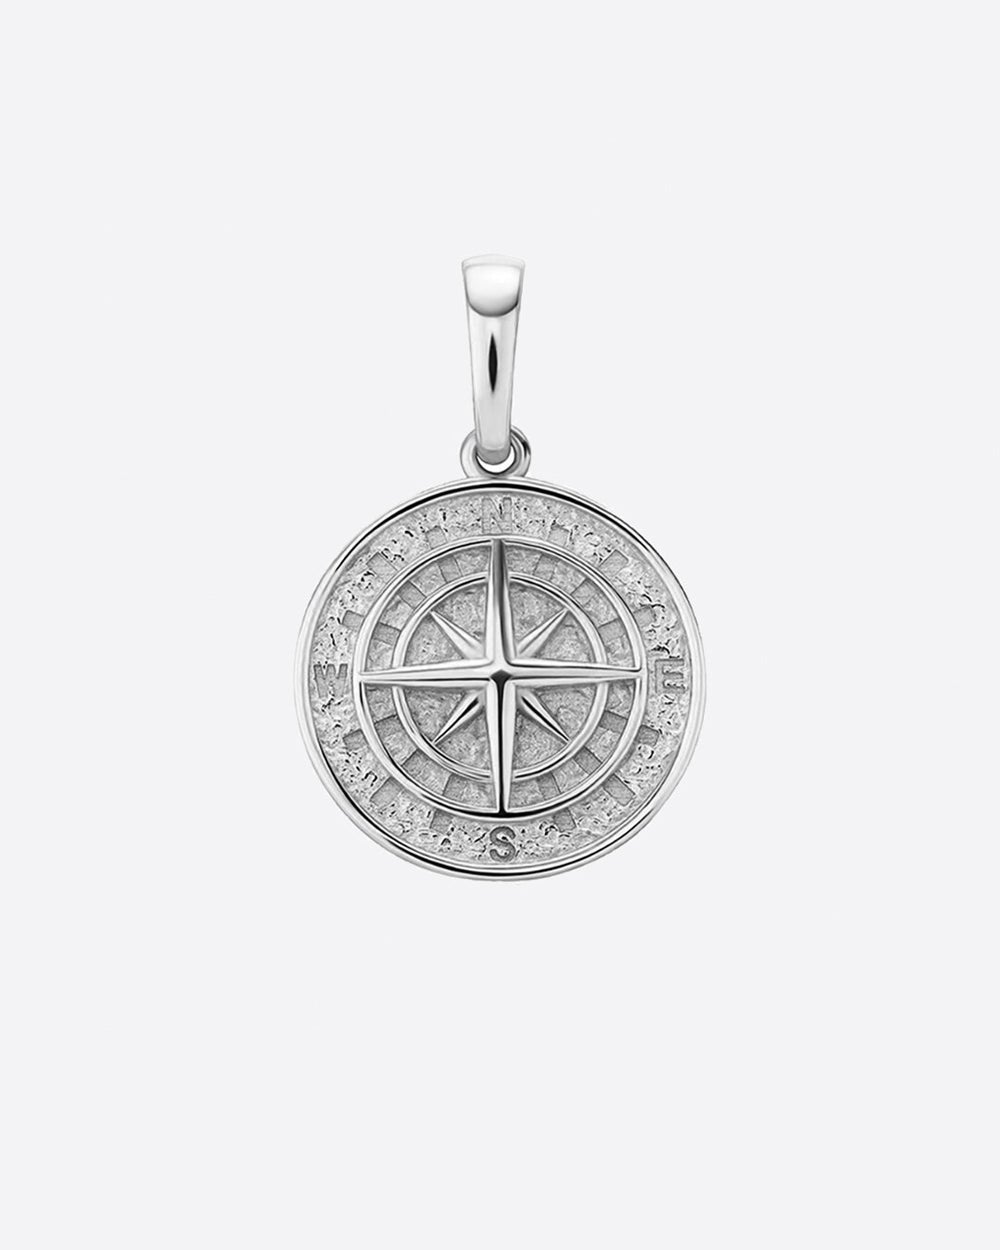 CLEAN COMPASS PENDANT 925. - WHITE GOLD